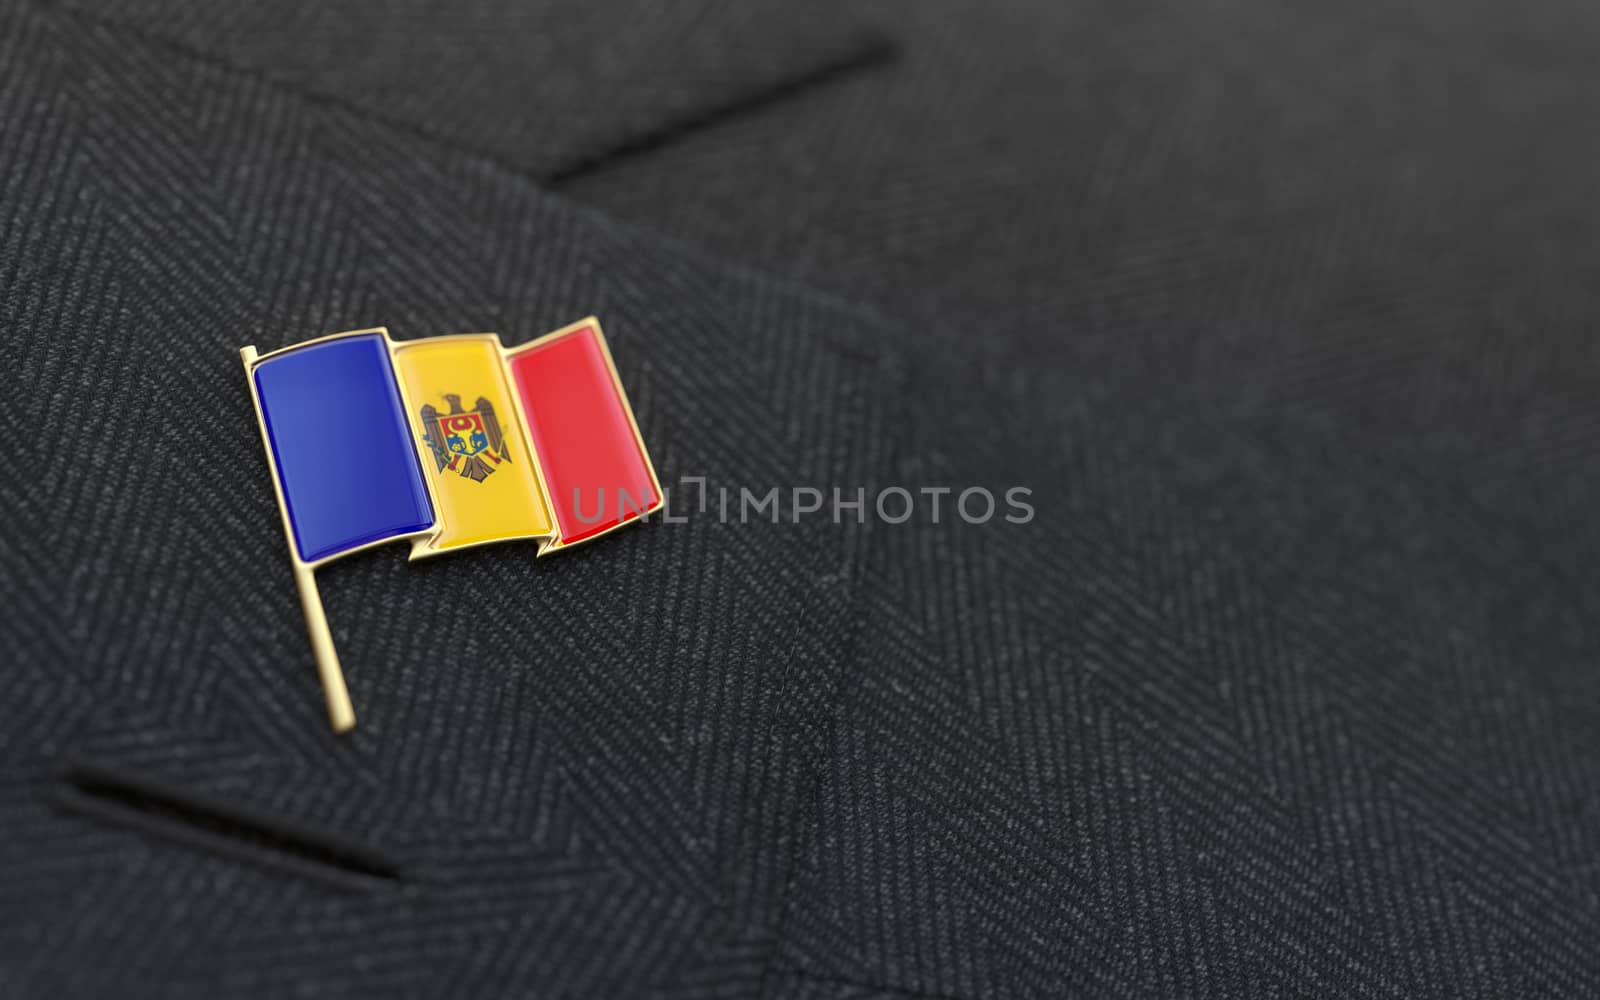 Moldova flag lapel pin on the collar of a business suit jacket shows patriotism